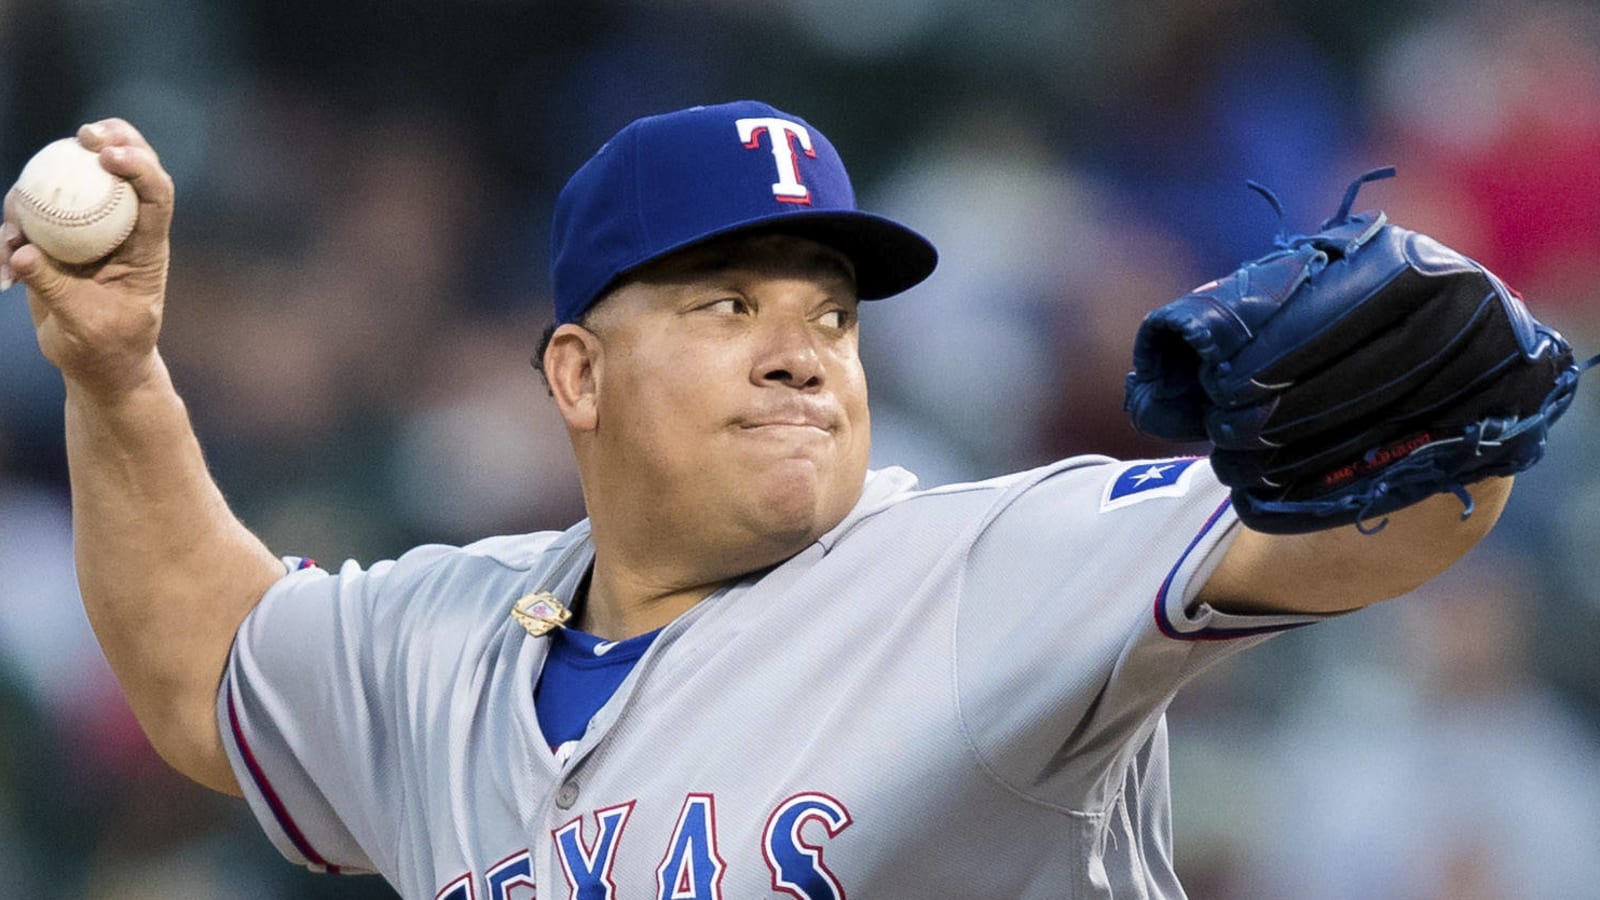 'Big Sexy' wants to pitch at 47? That's really old news